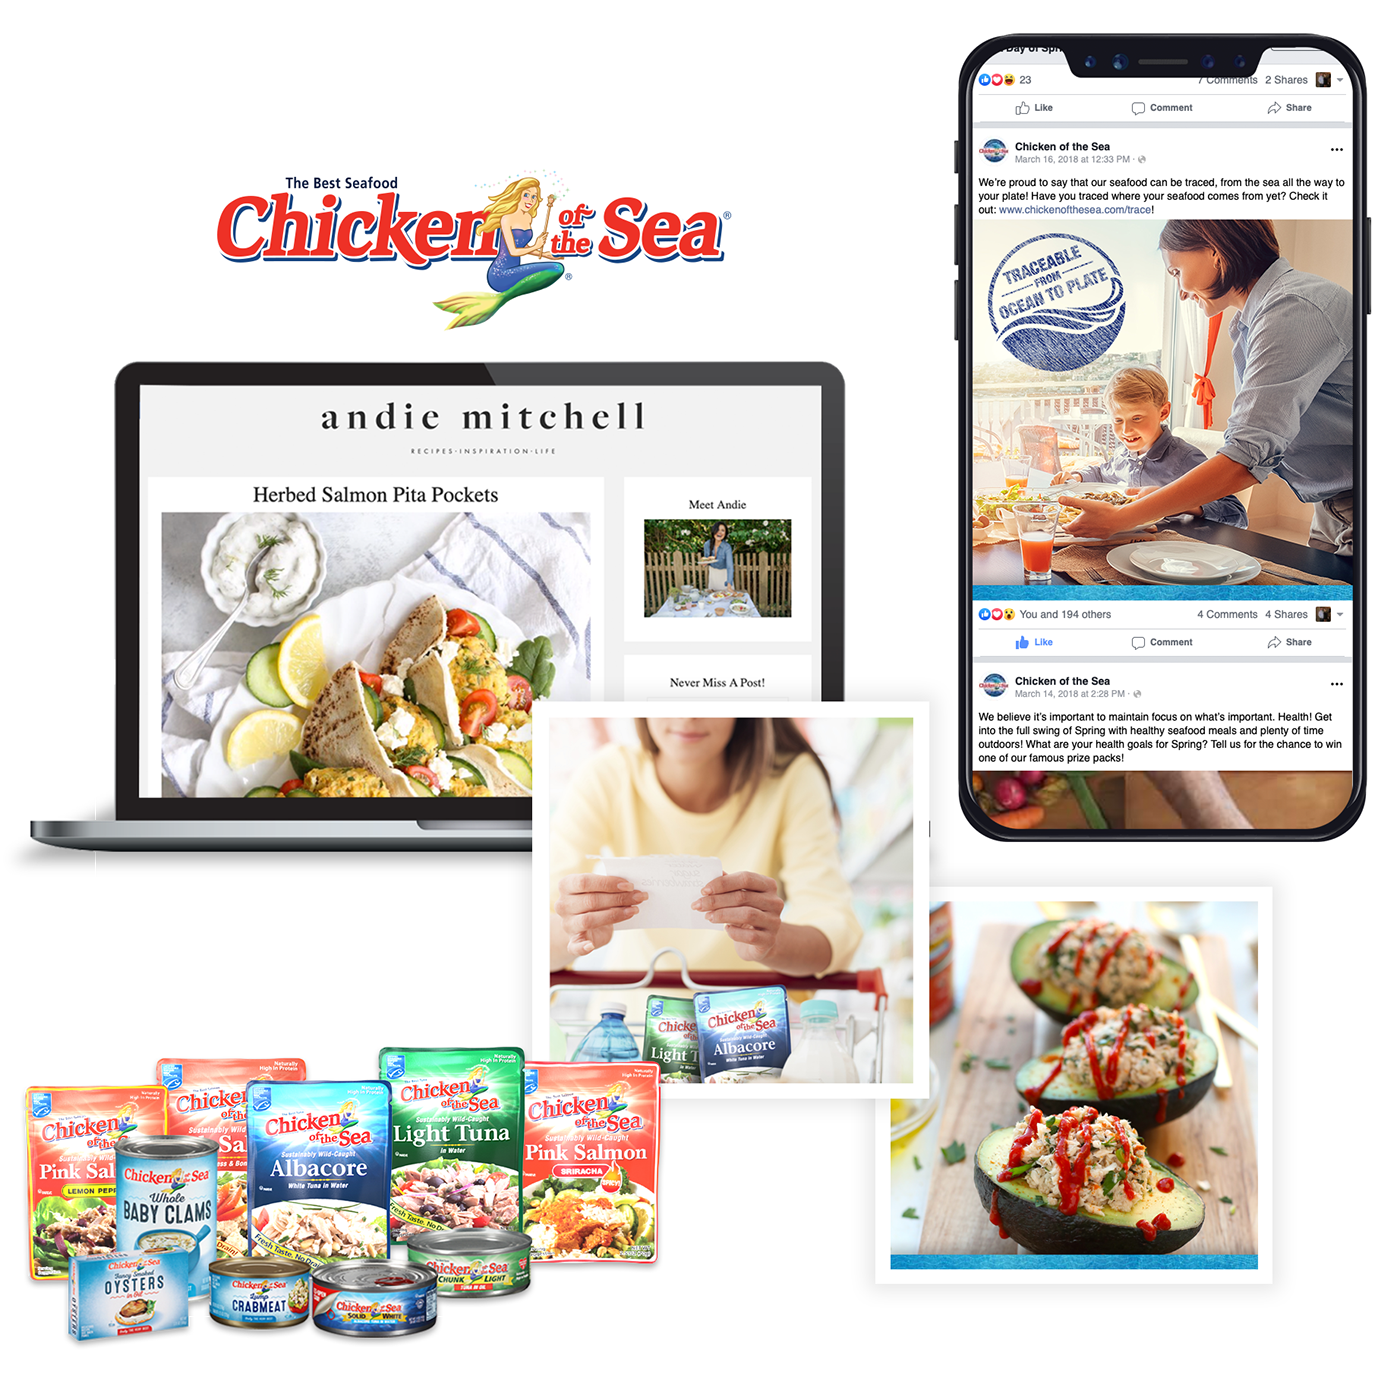 cpg tuna Packaging display ads social media Experiential influencers